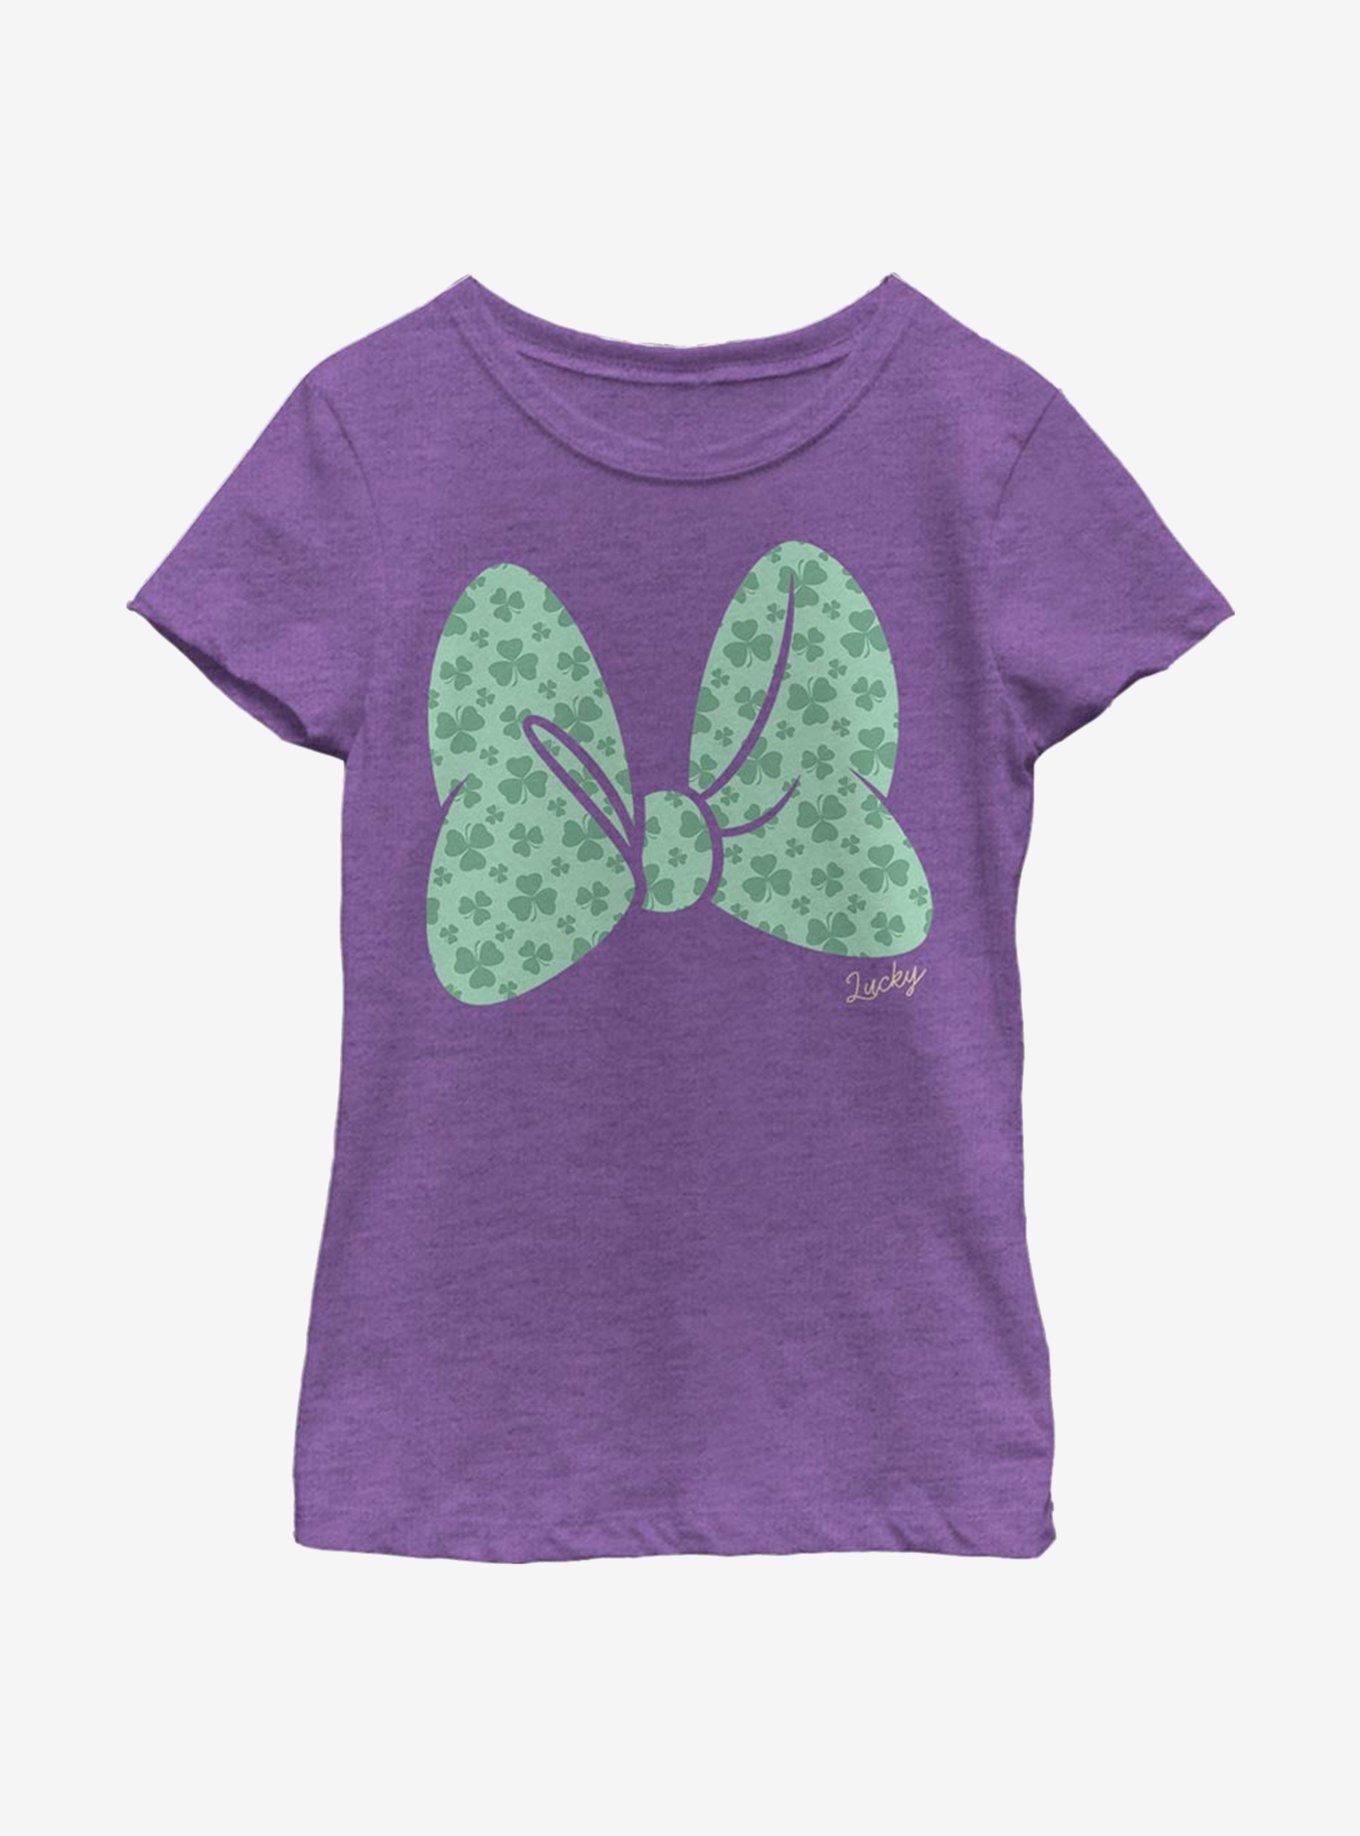 Disney Minnie Mouse Clover Bow Youth Girls T-Shirt, PURPLE BERRY, hi-res